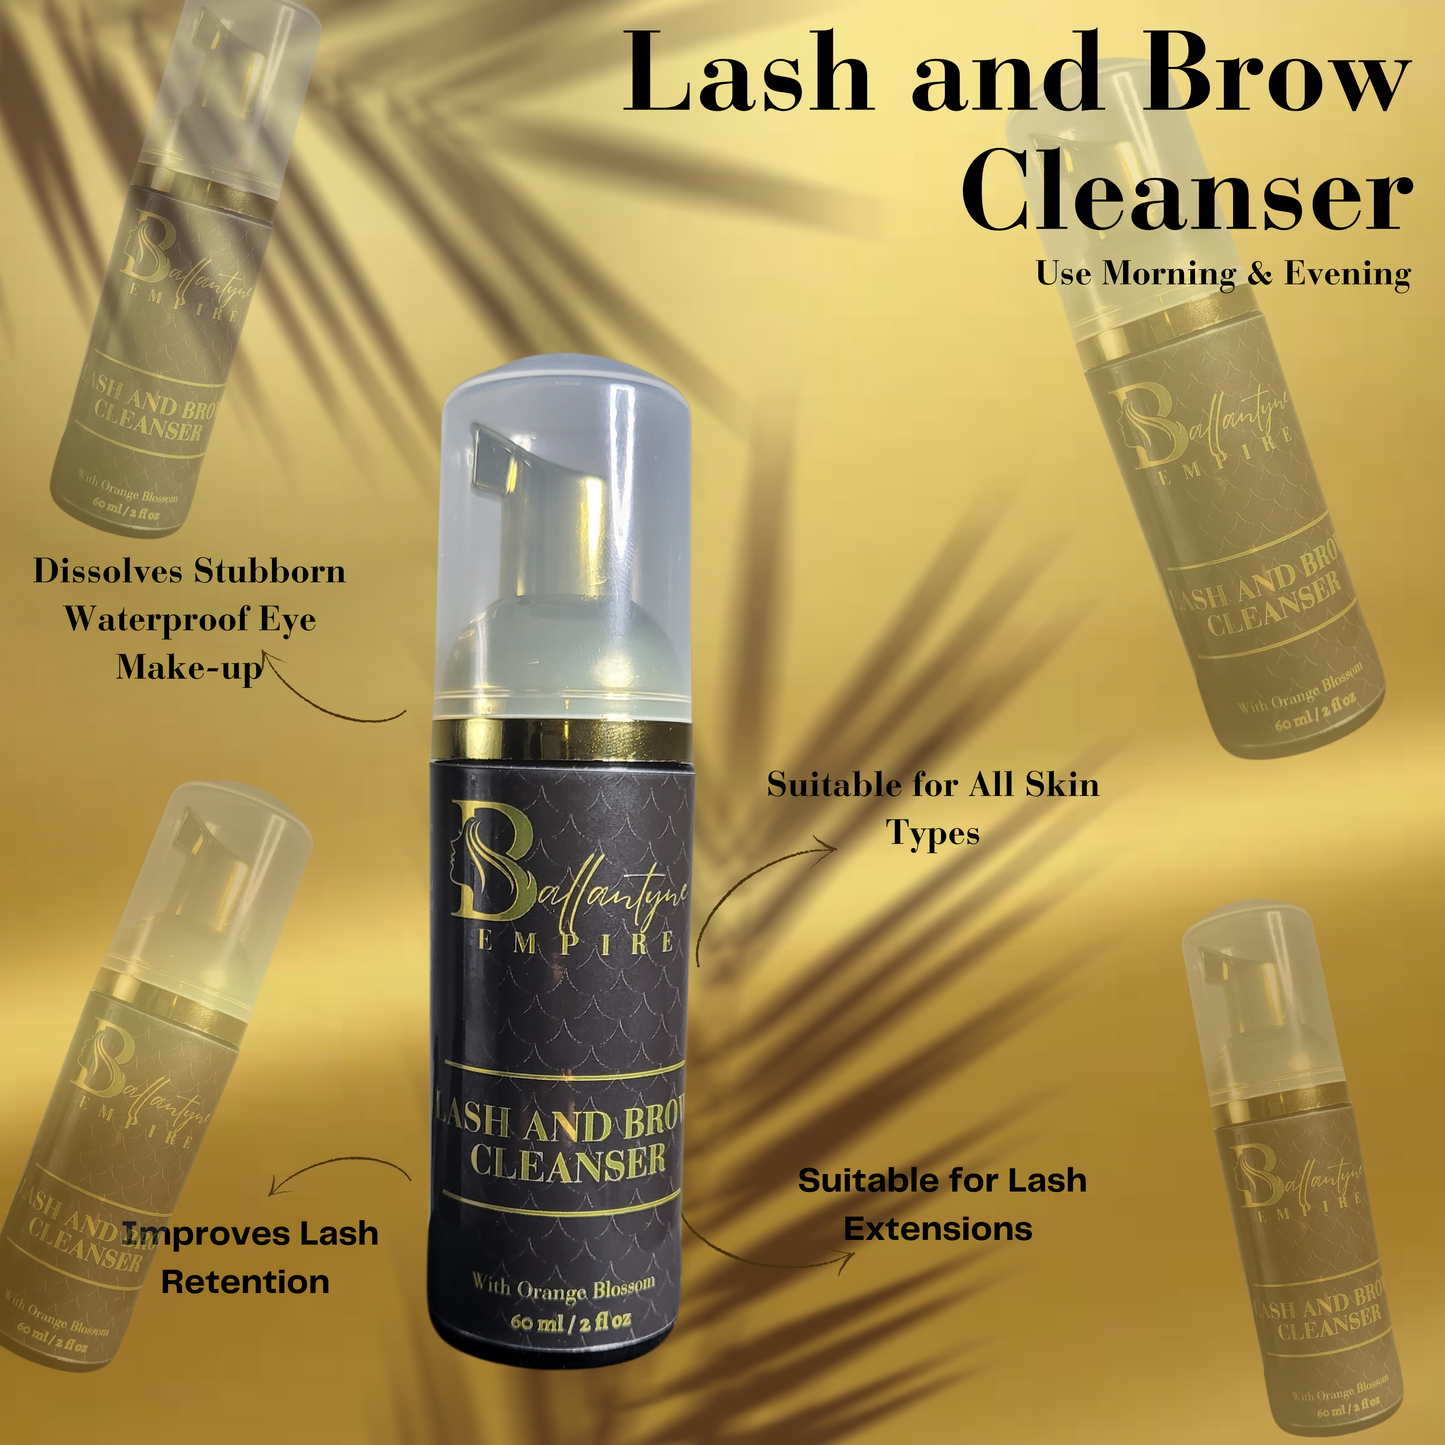 NEW* Lash and Brow Cleanser